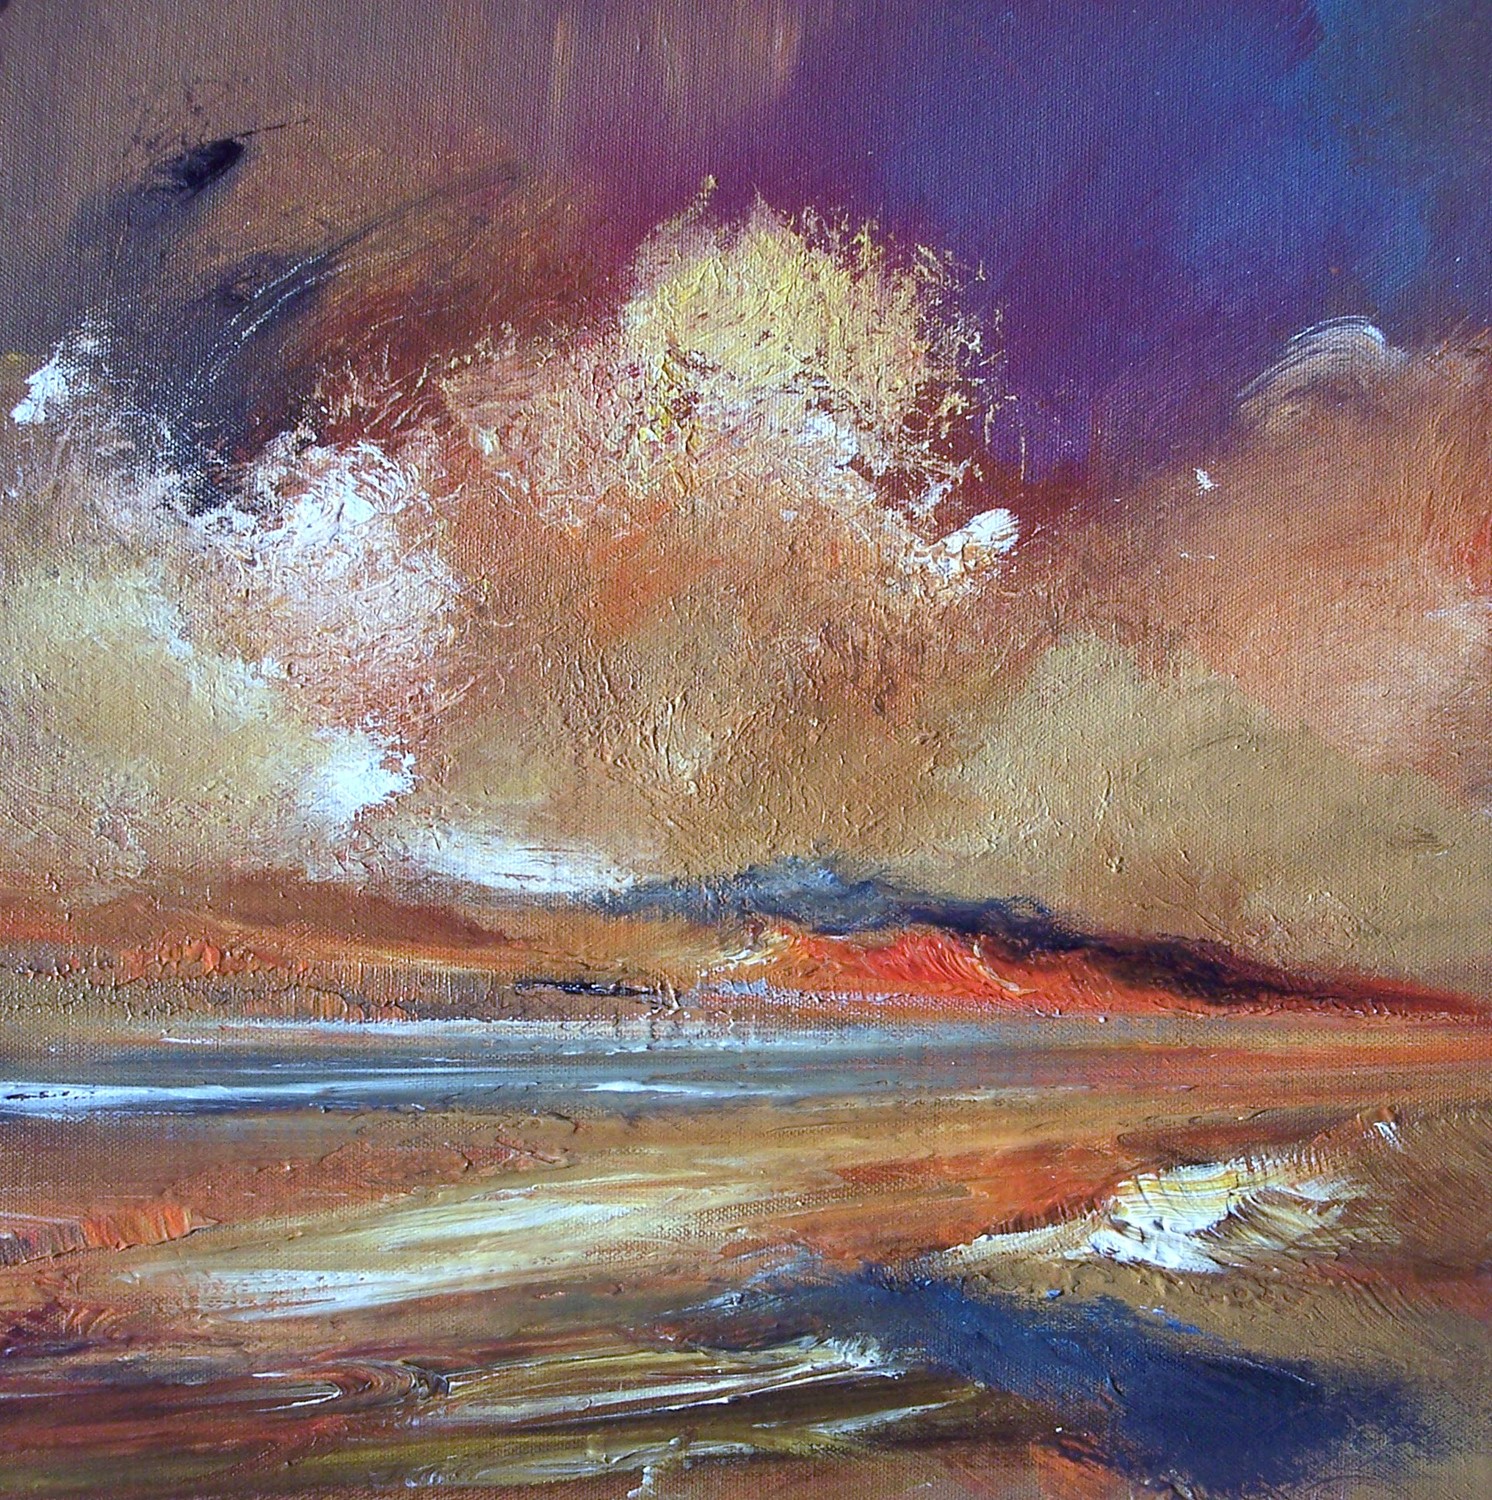 'Edging into Night' by artist Rosanne Barr